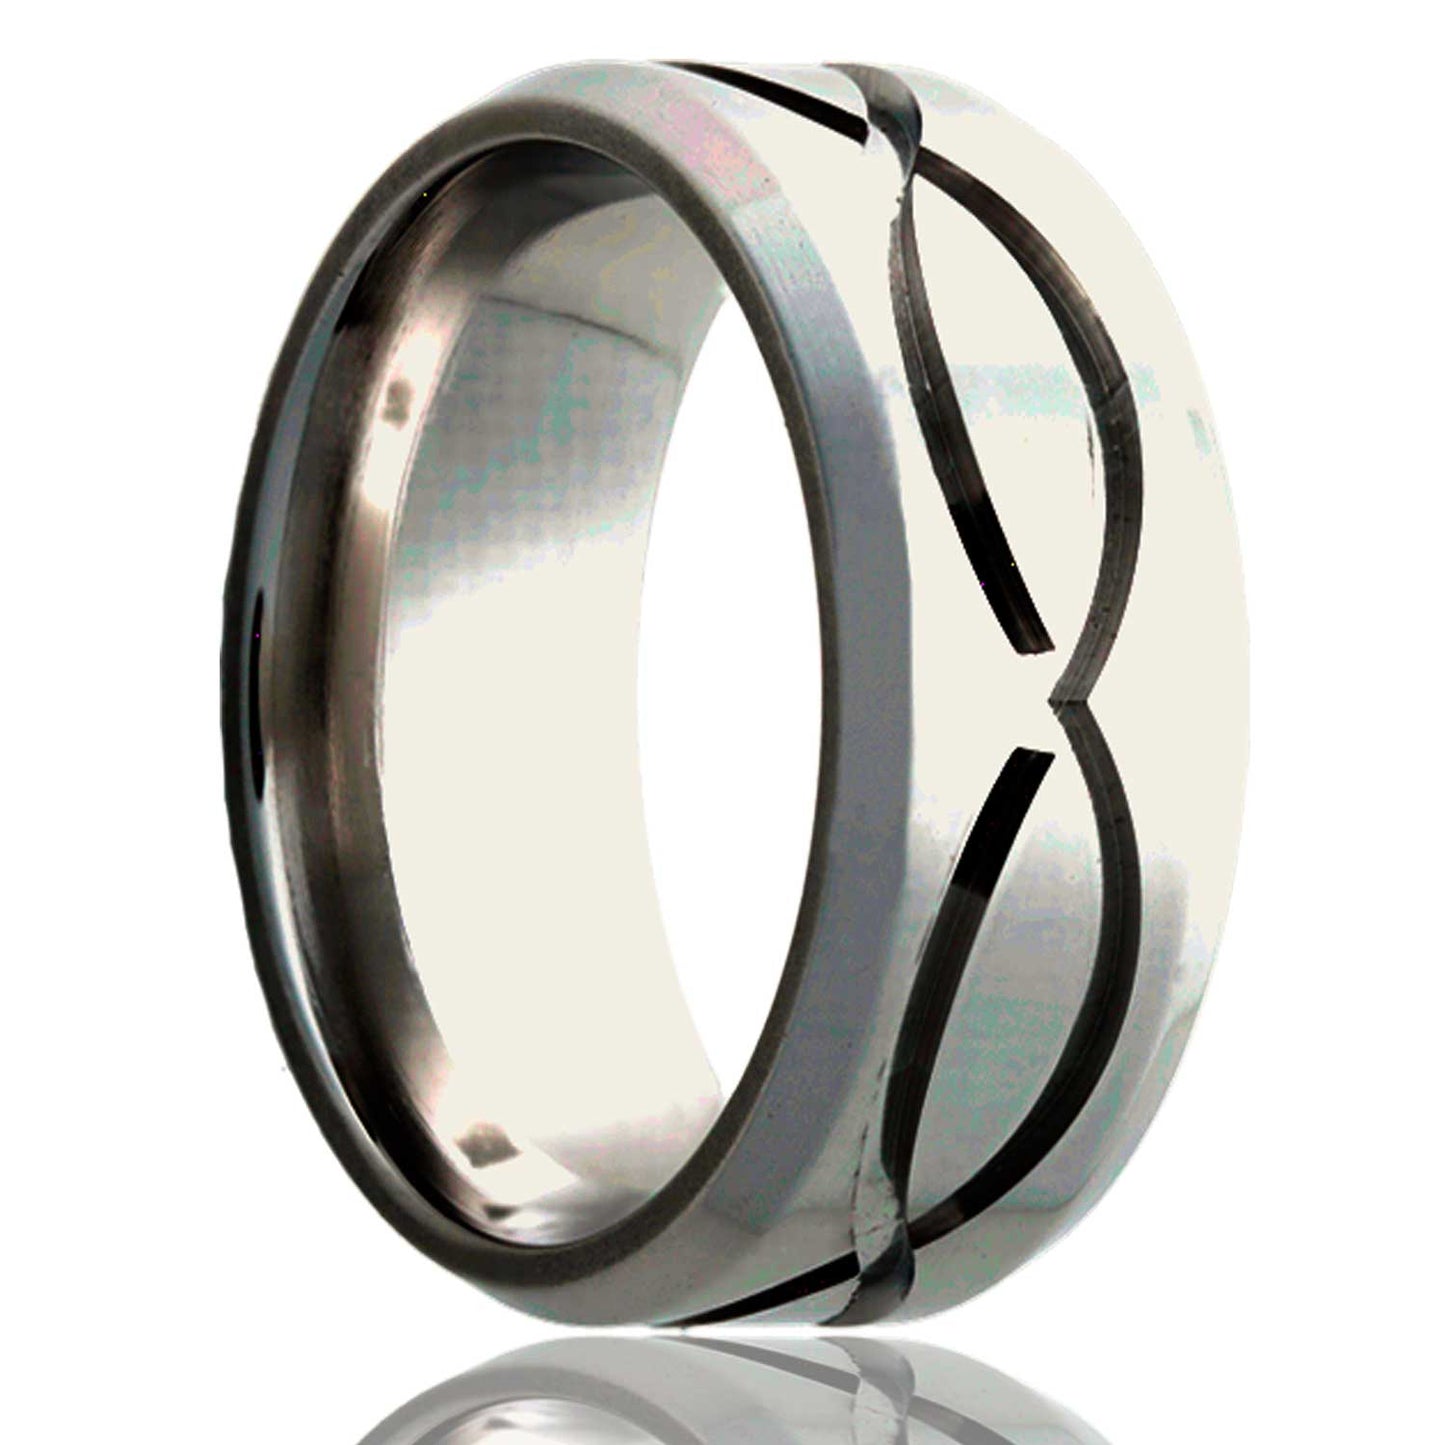 A infinity waves titanium wedding band with beveled edges displayed on a neutral white background.